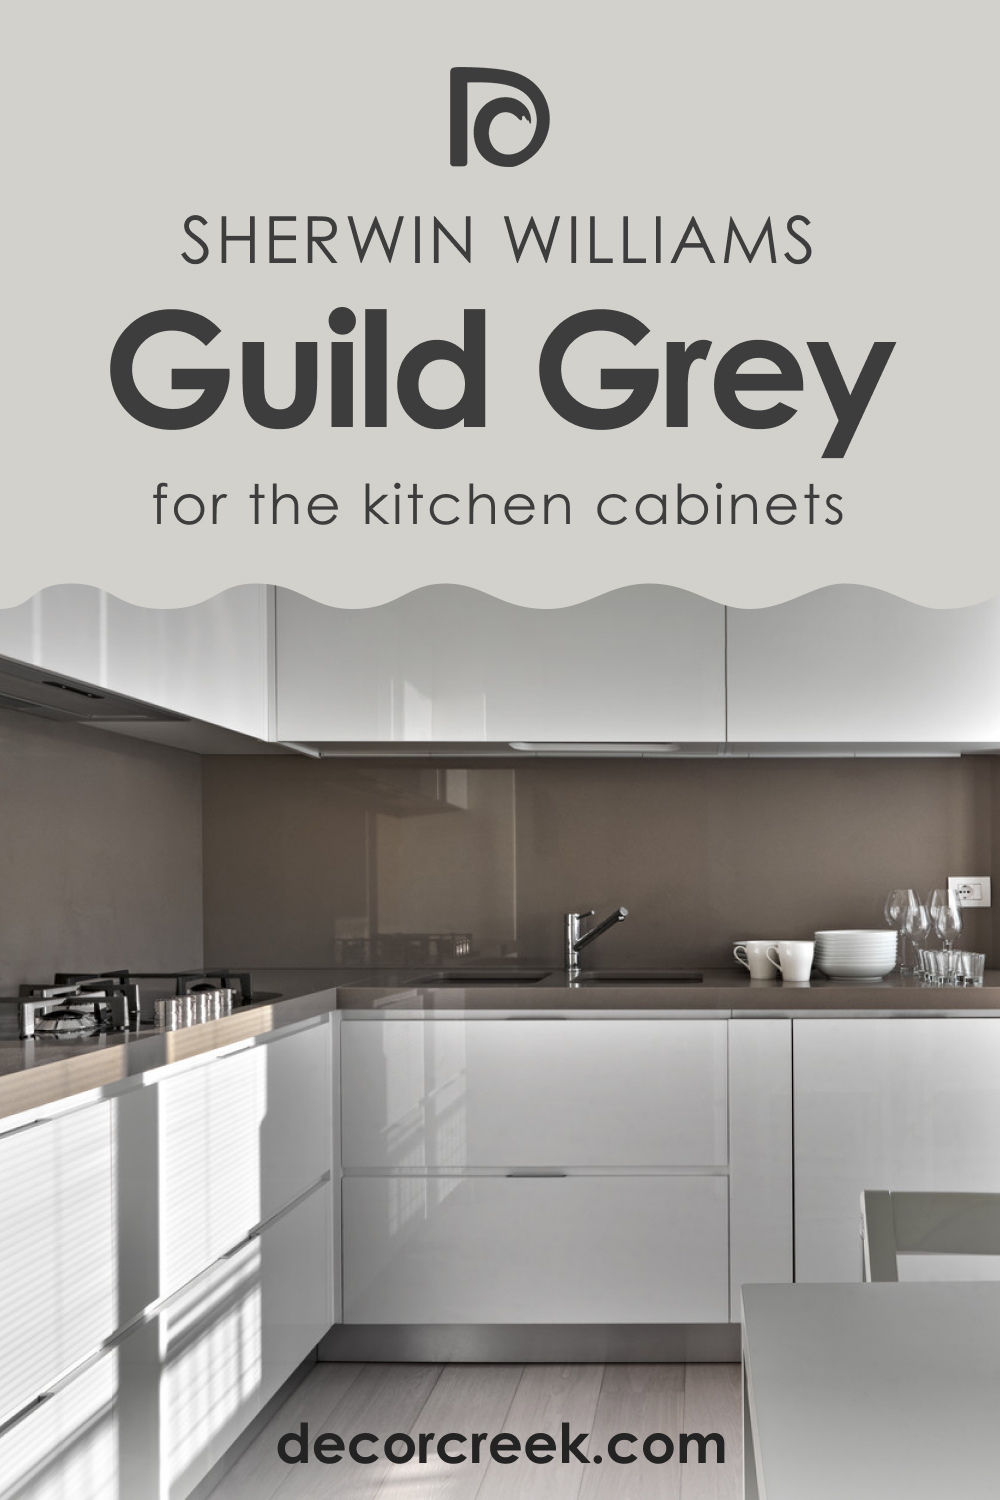 How to Use SW 9561 Guild Grey for the Kitchen Cabinets?